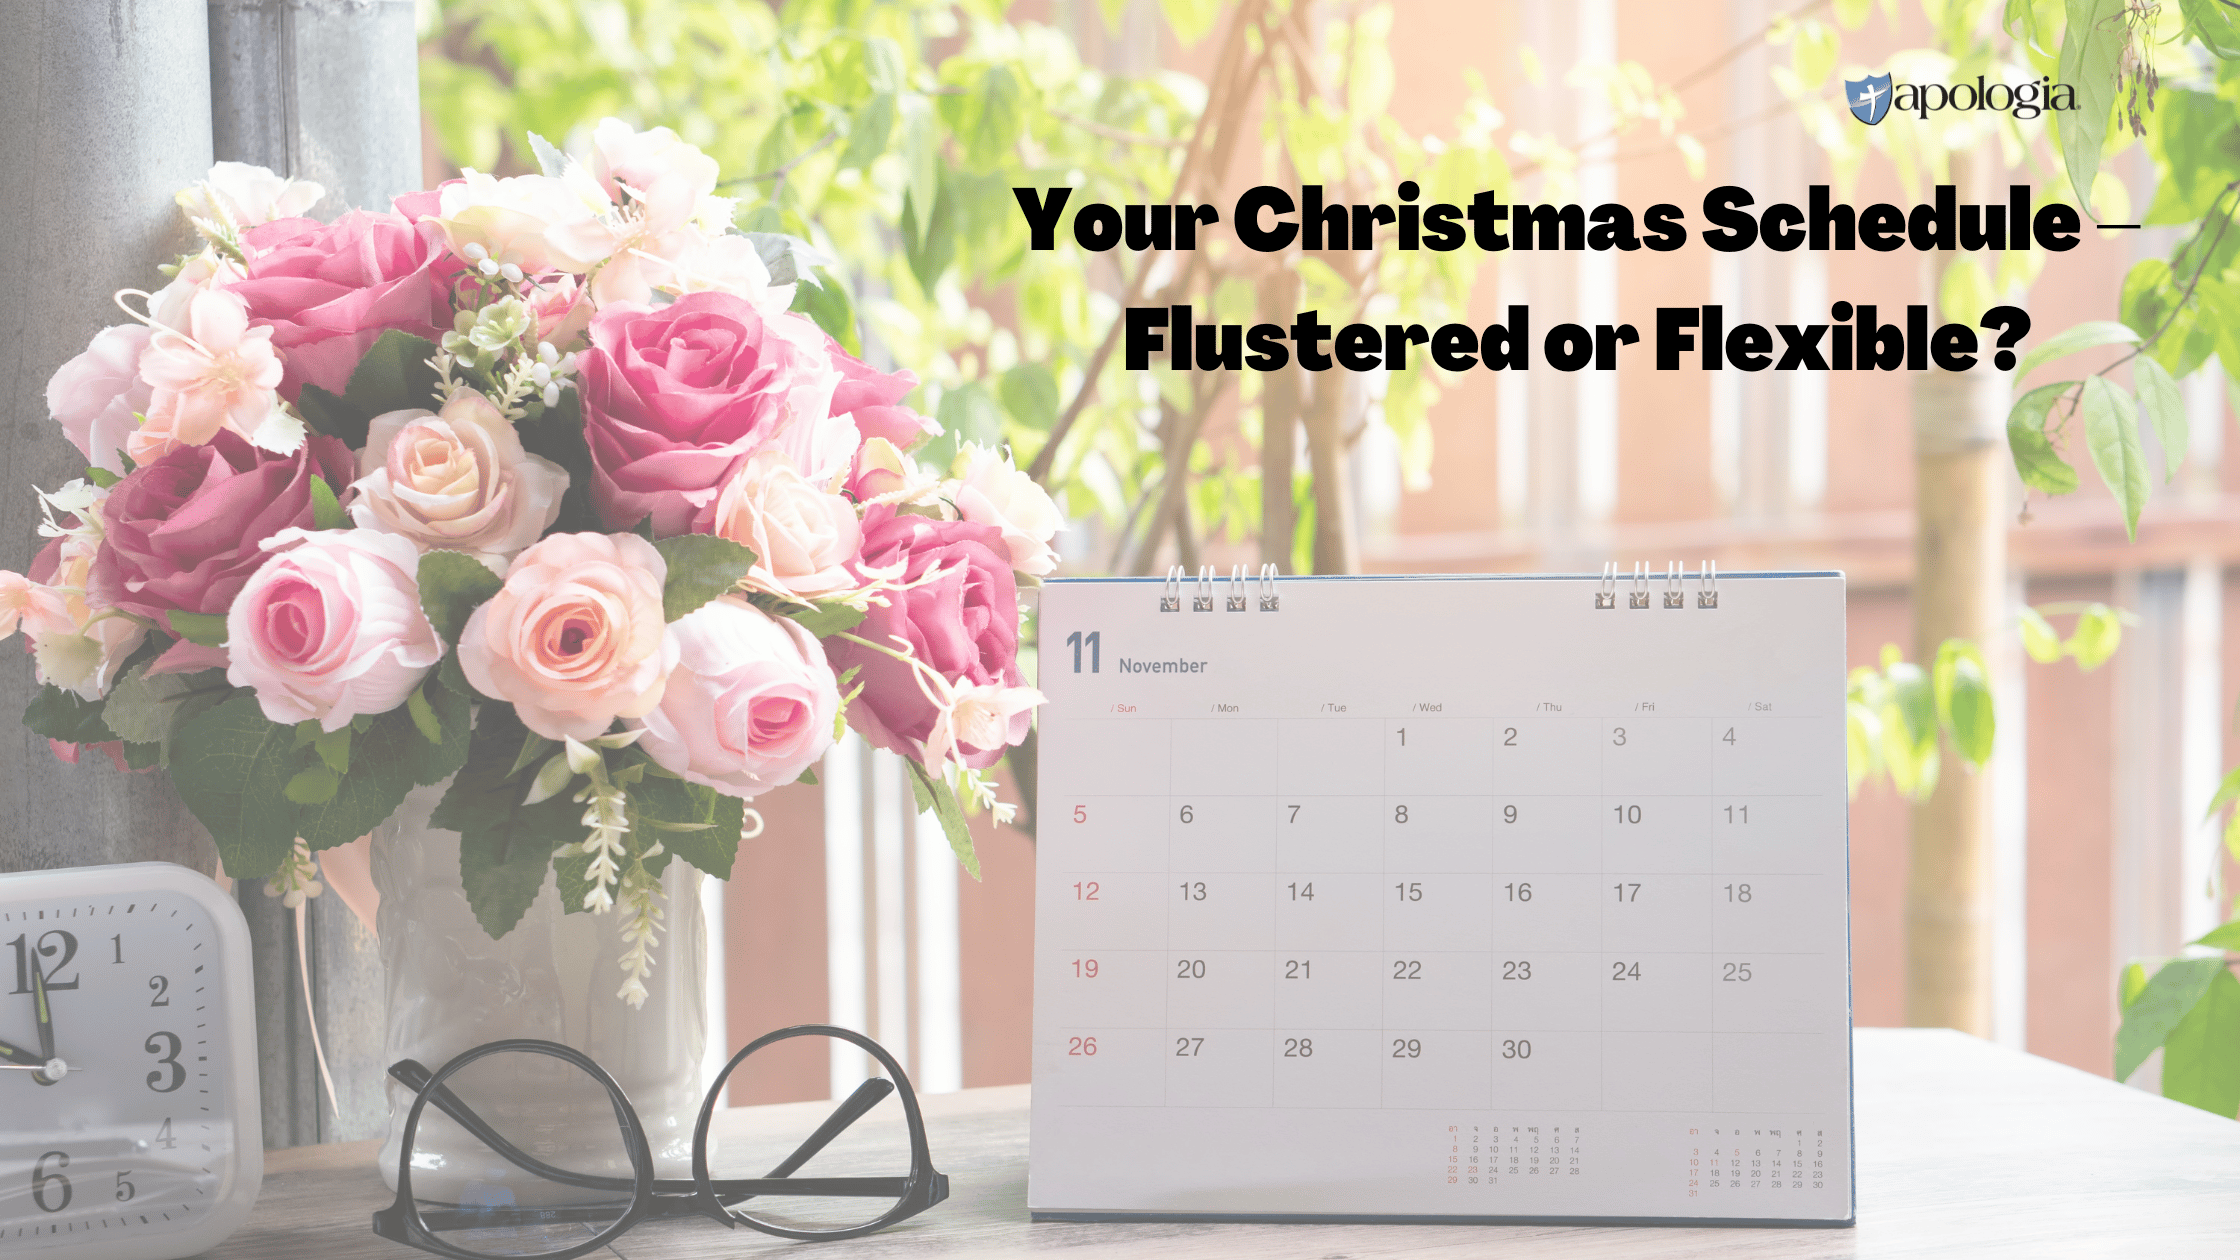 Your Christmas Schedule – Flustered or Flexible?